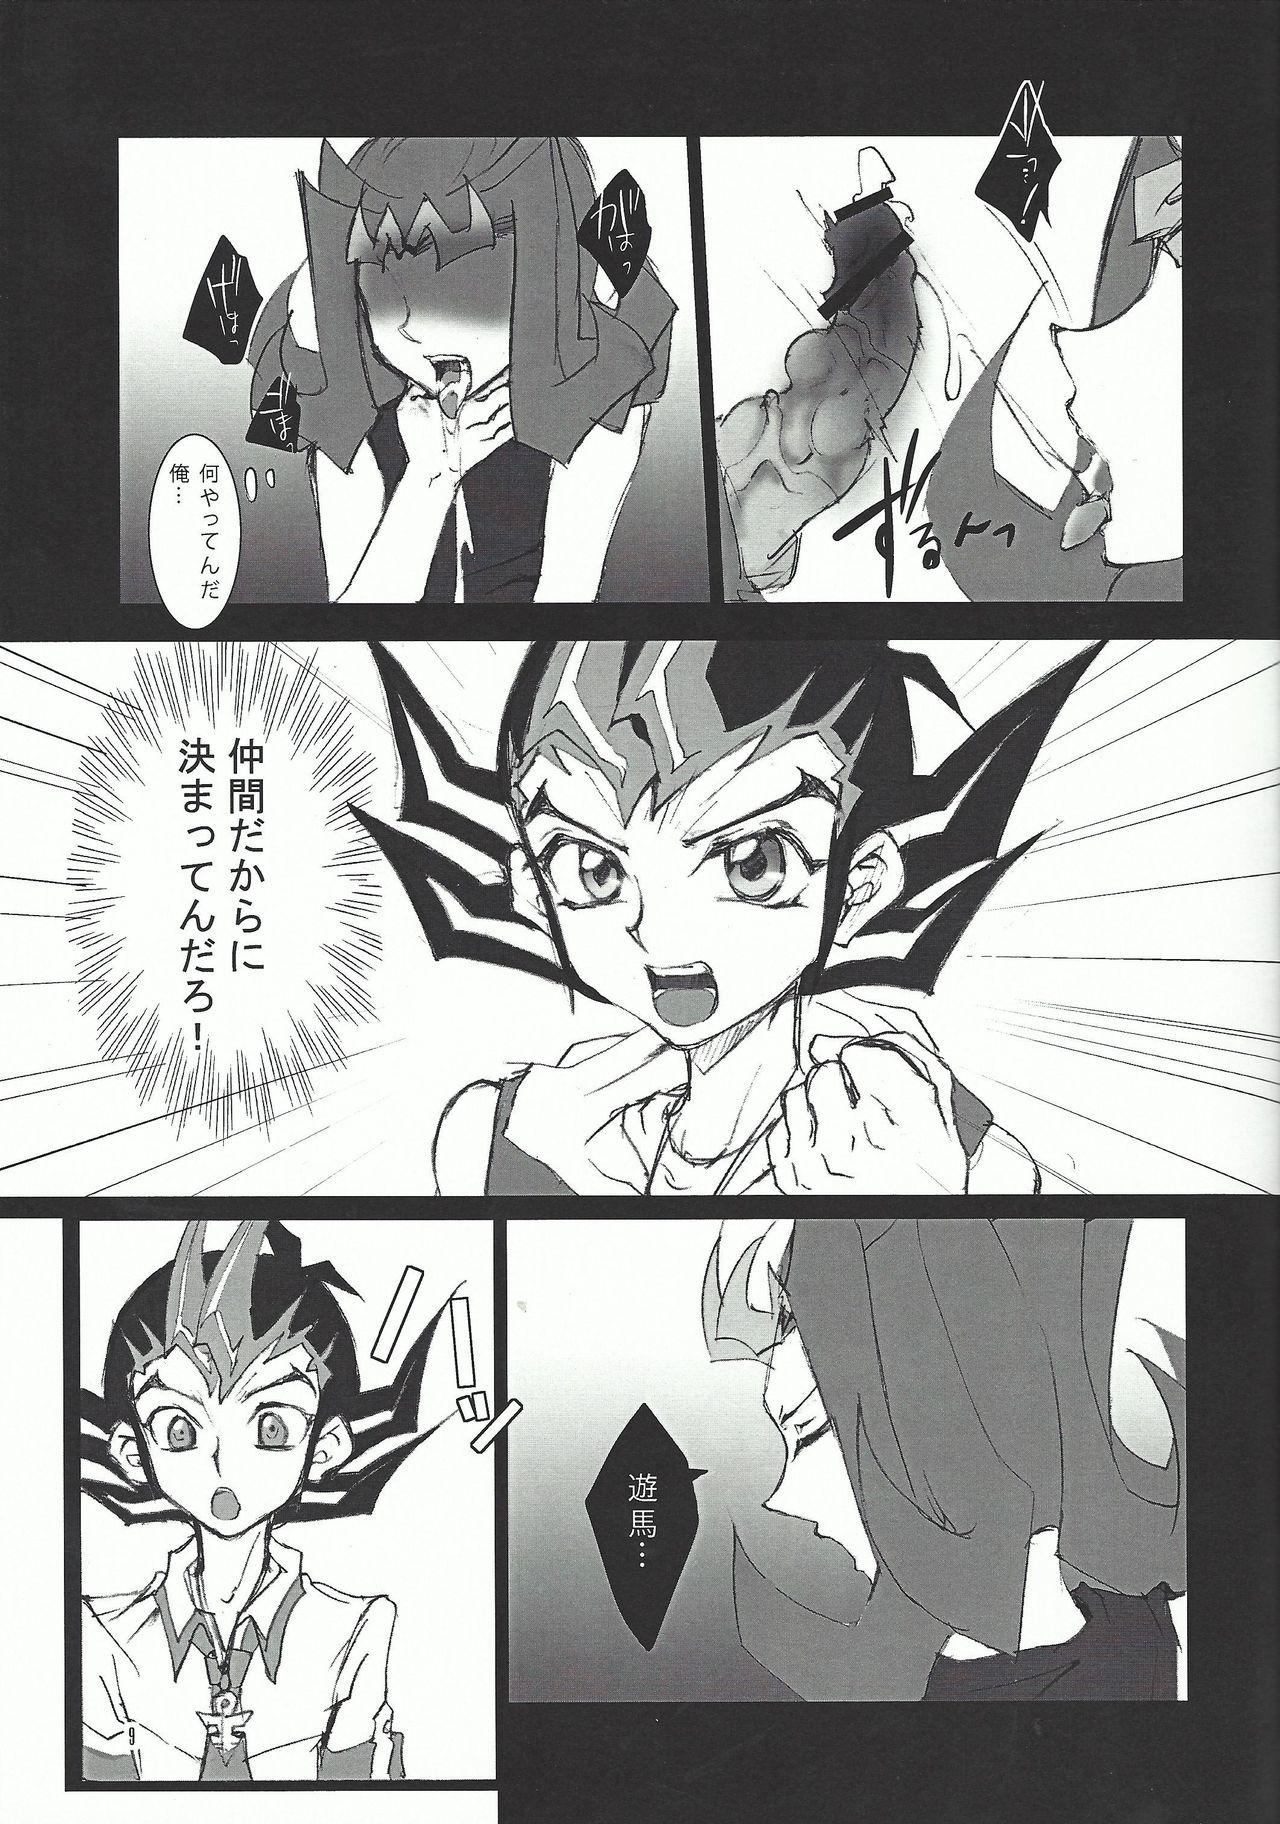 Assfingering Shark Dxxg - Yu-gi-oh zexal Livecams - Page 8